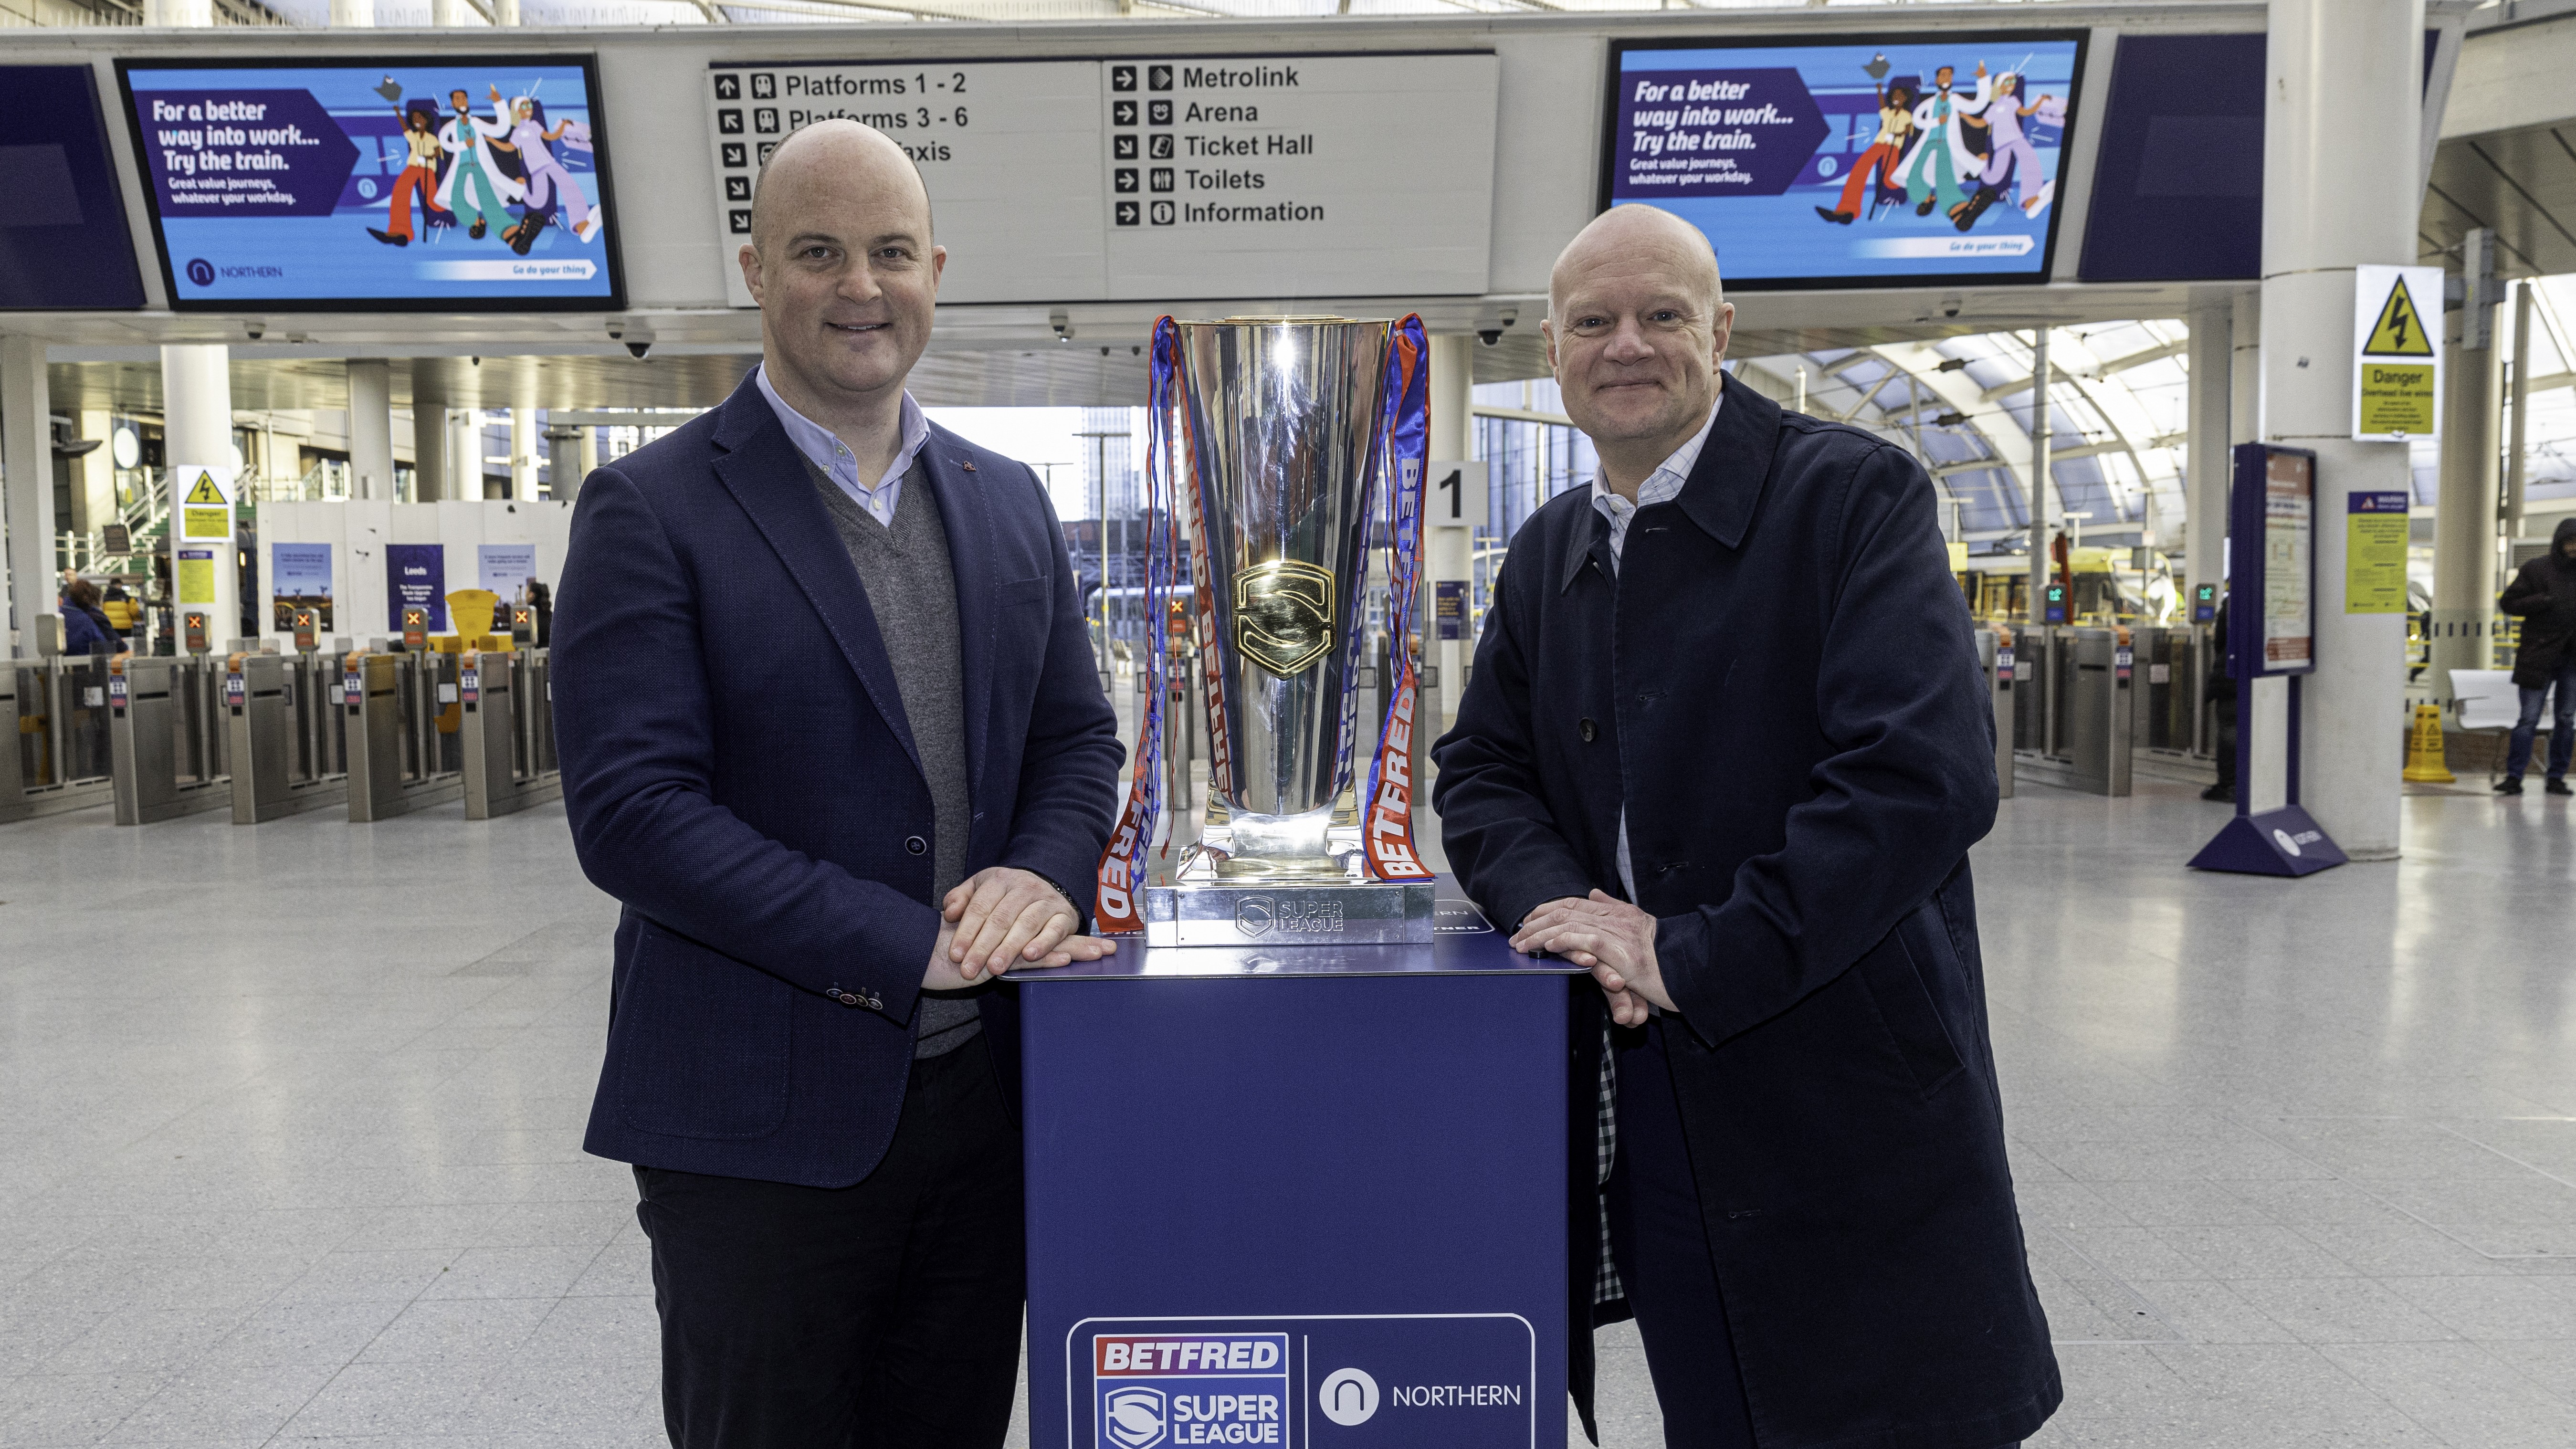 Northern and Super League Partnership